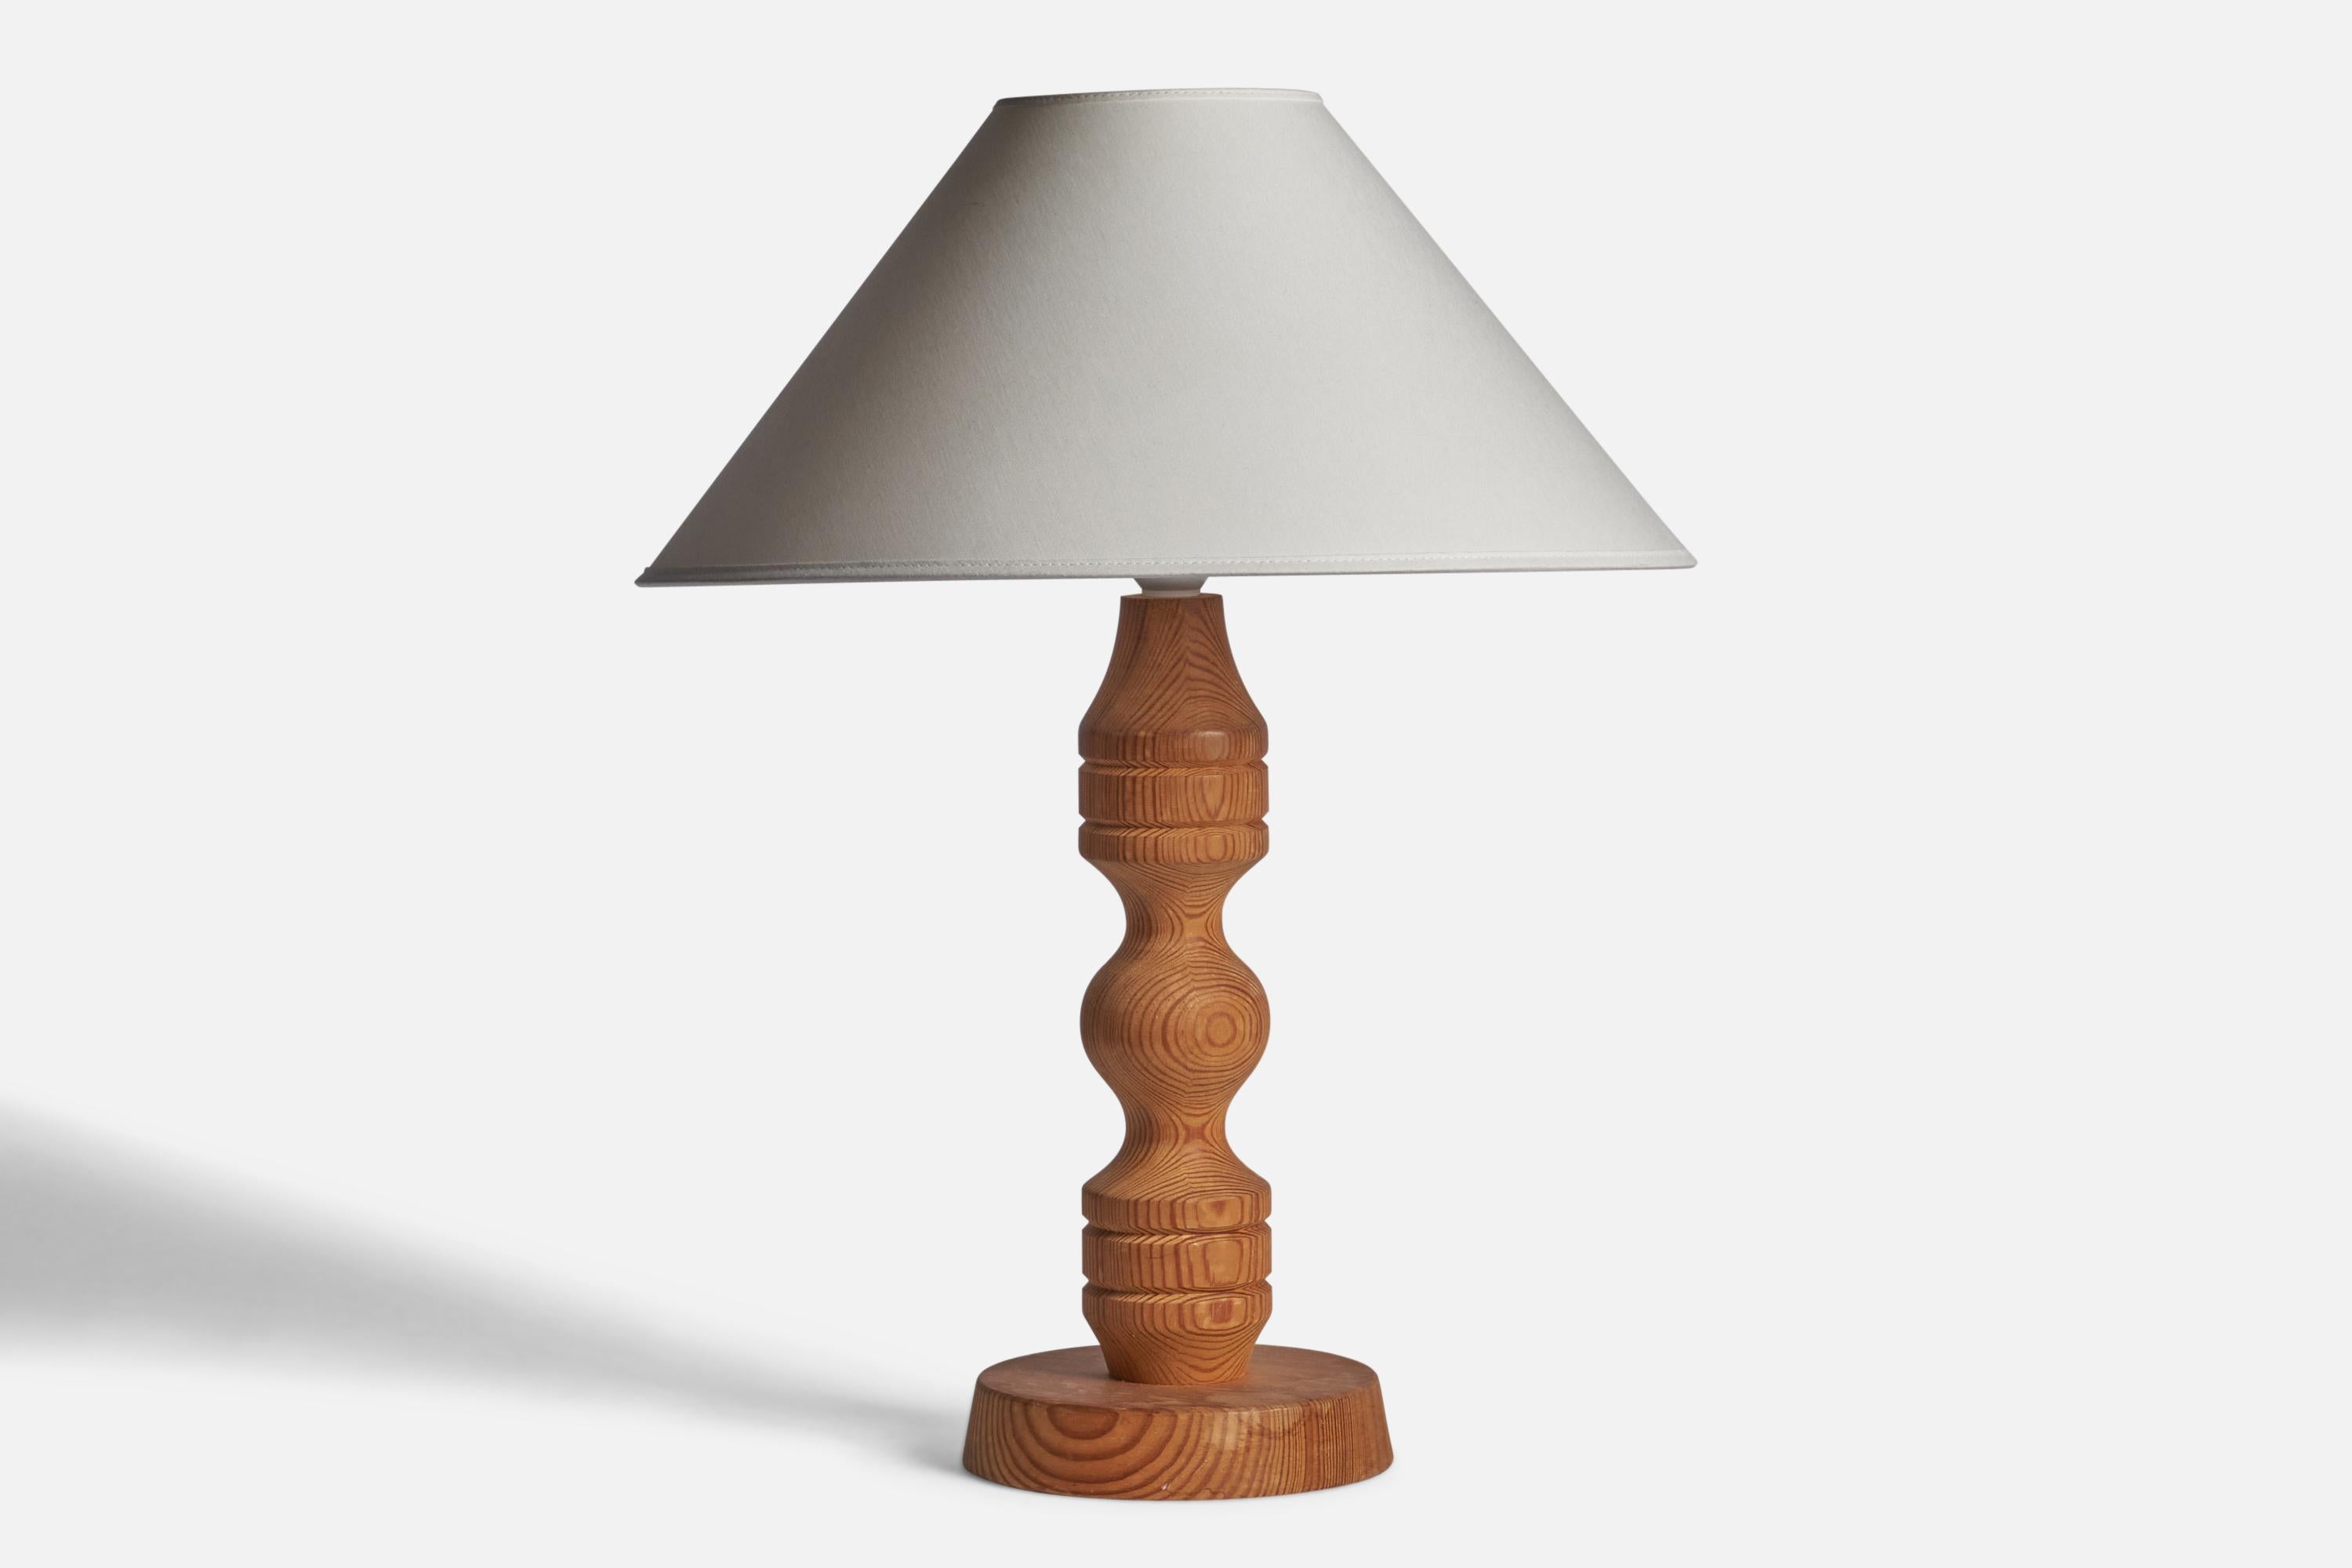 A pine table lamp designed and produced in Sweden, 1970s.

Dimensions of Lamp (inches): 15.75” H x 6.5” Diameter
Dimensions of Shade (inches): 4.5” Top Diameter x 16” Bottom Diameter x 7.25” H
Dimensions of Lamp with Shade (inches): 20.75” H x 16”